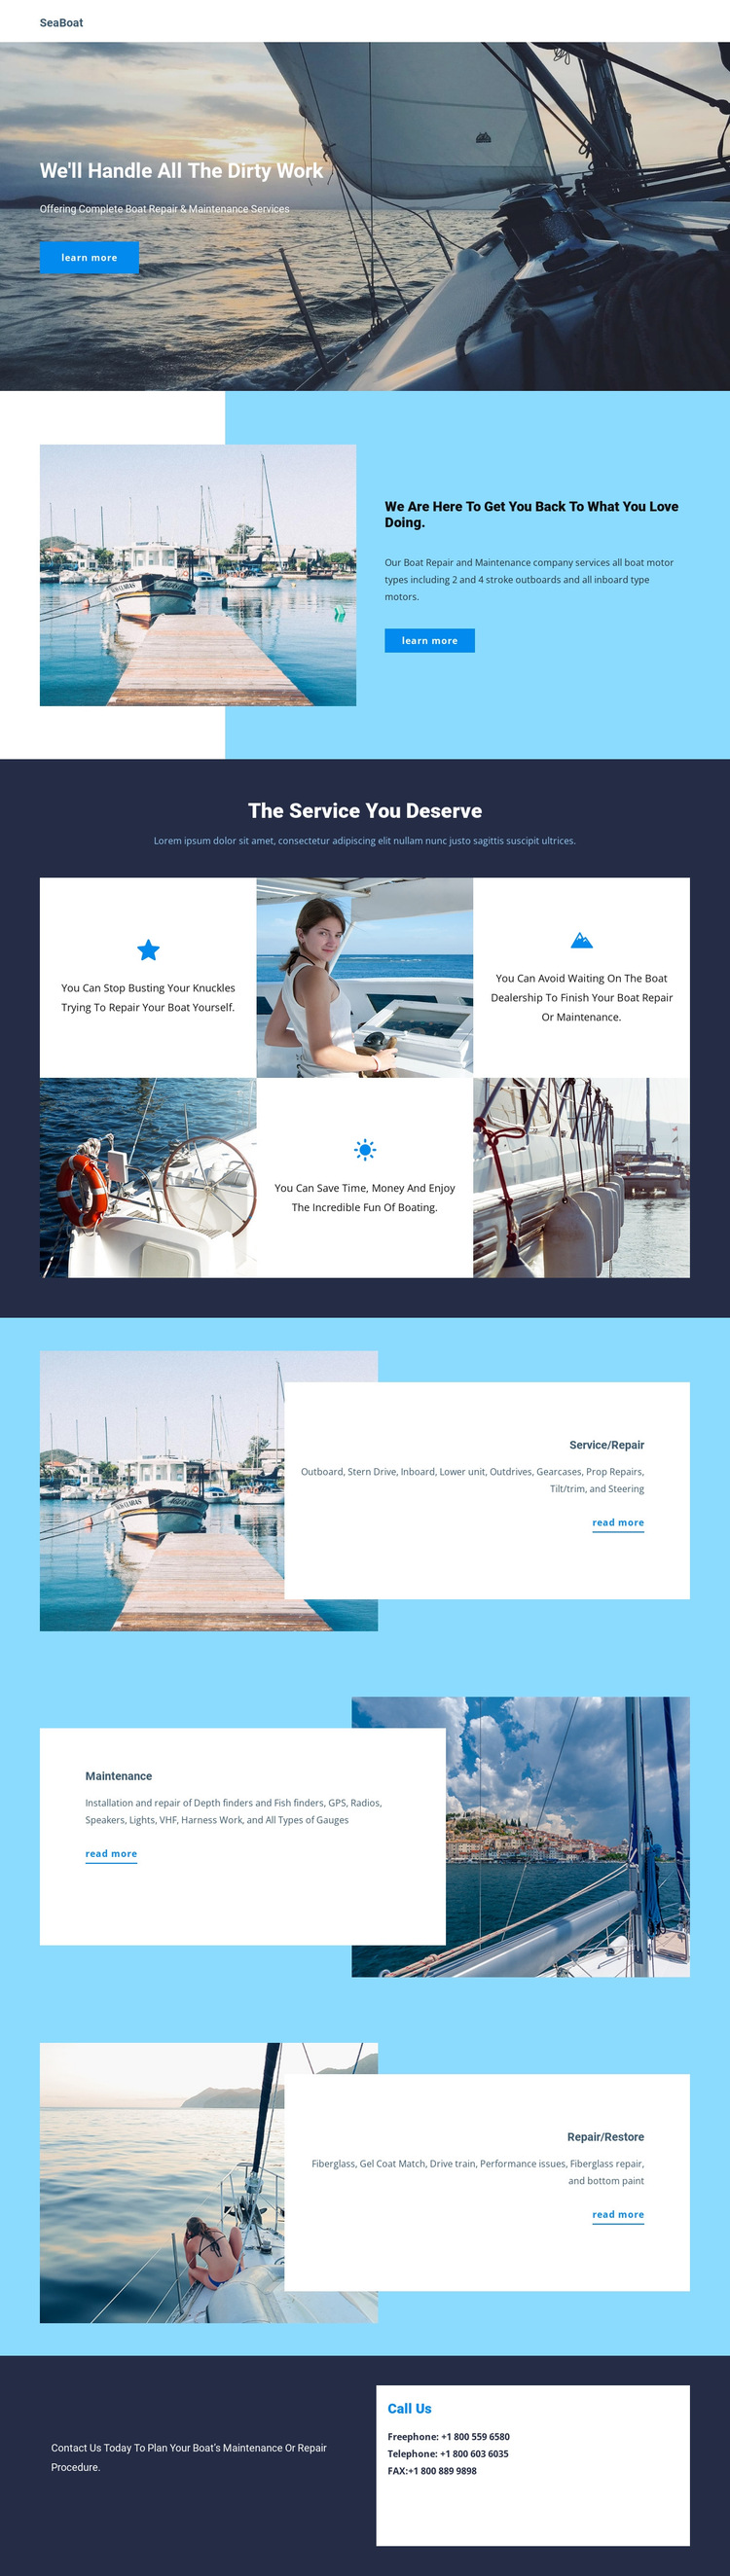 Travel on Seaboat HTML5 Template